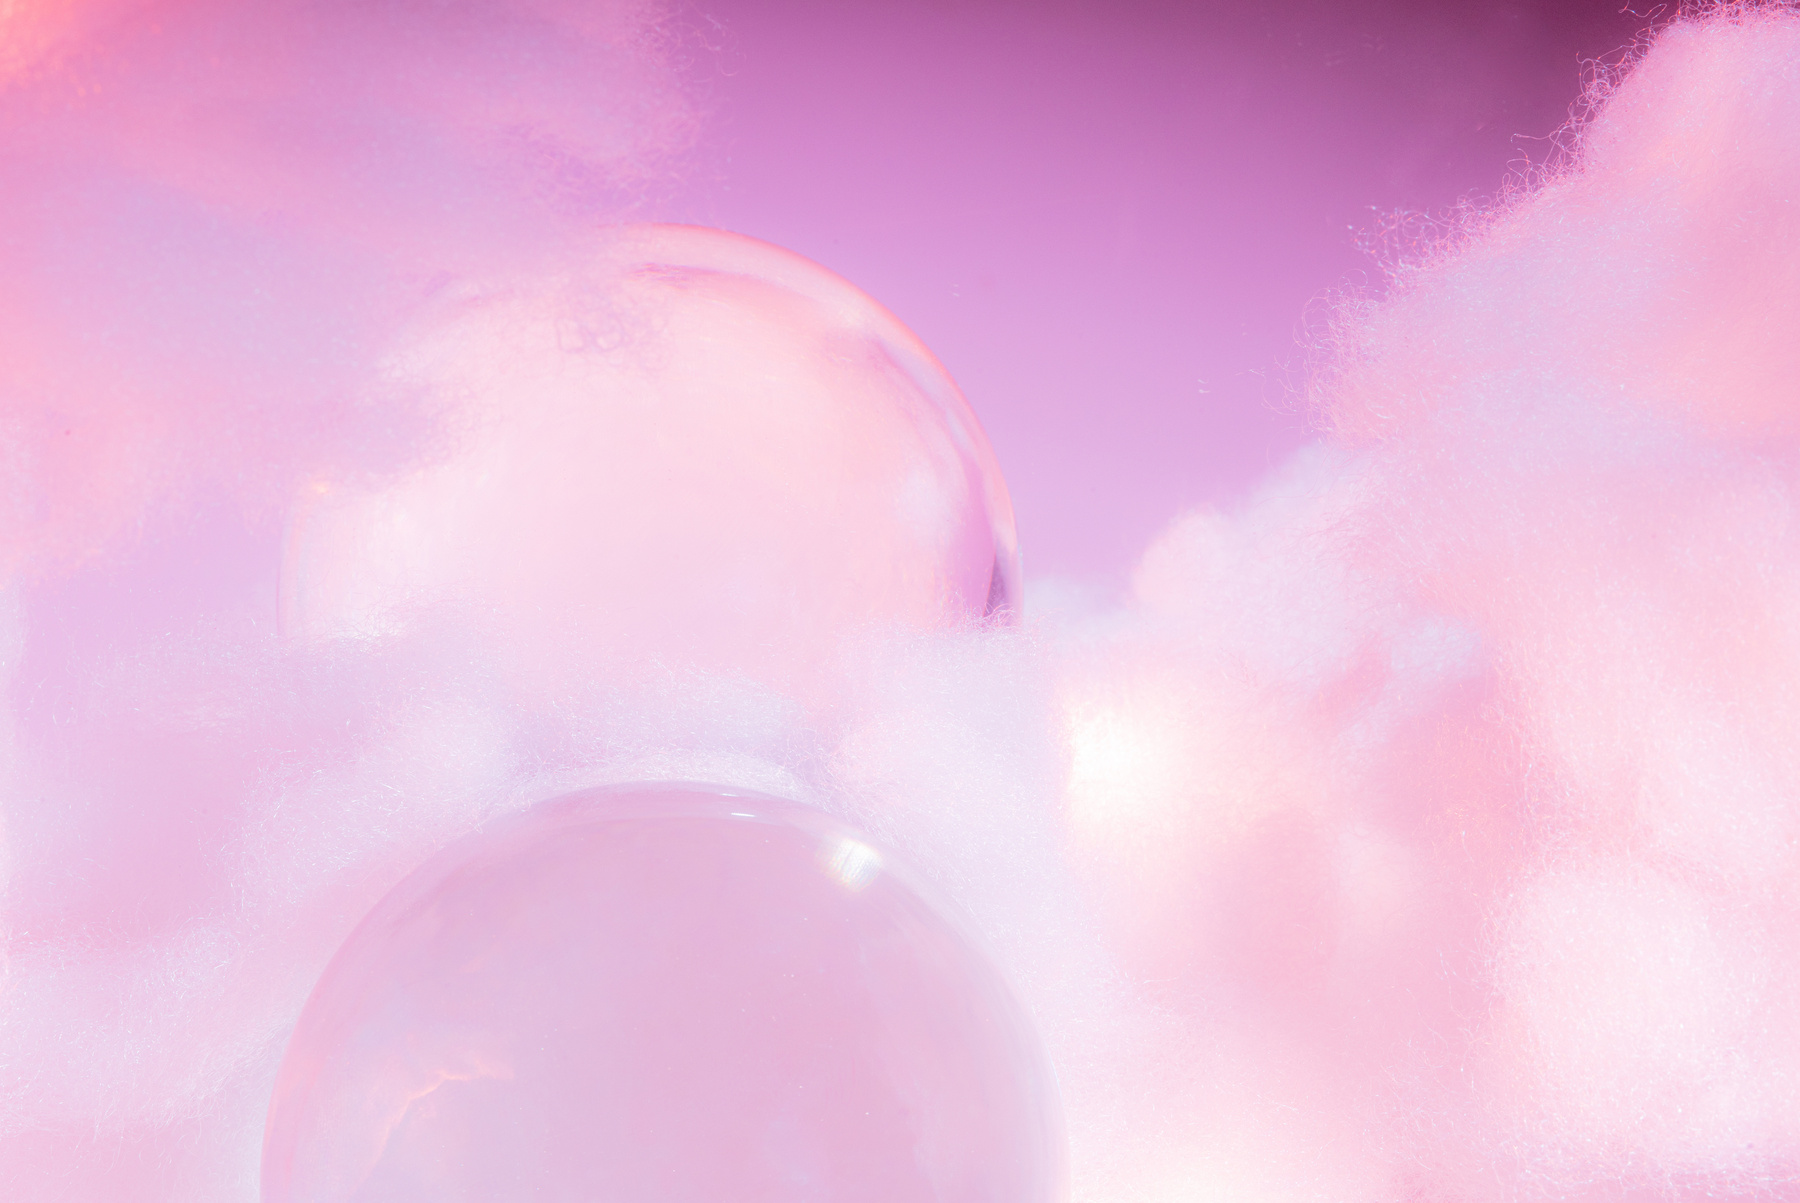 Clear Sphere with Clouds on Pastel Pink Background